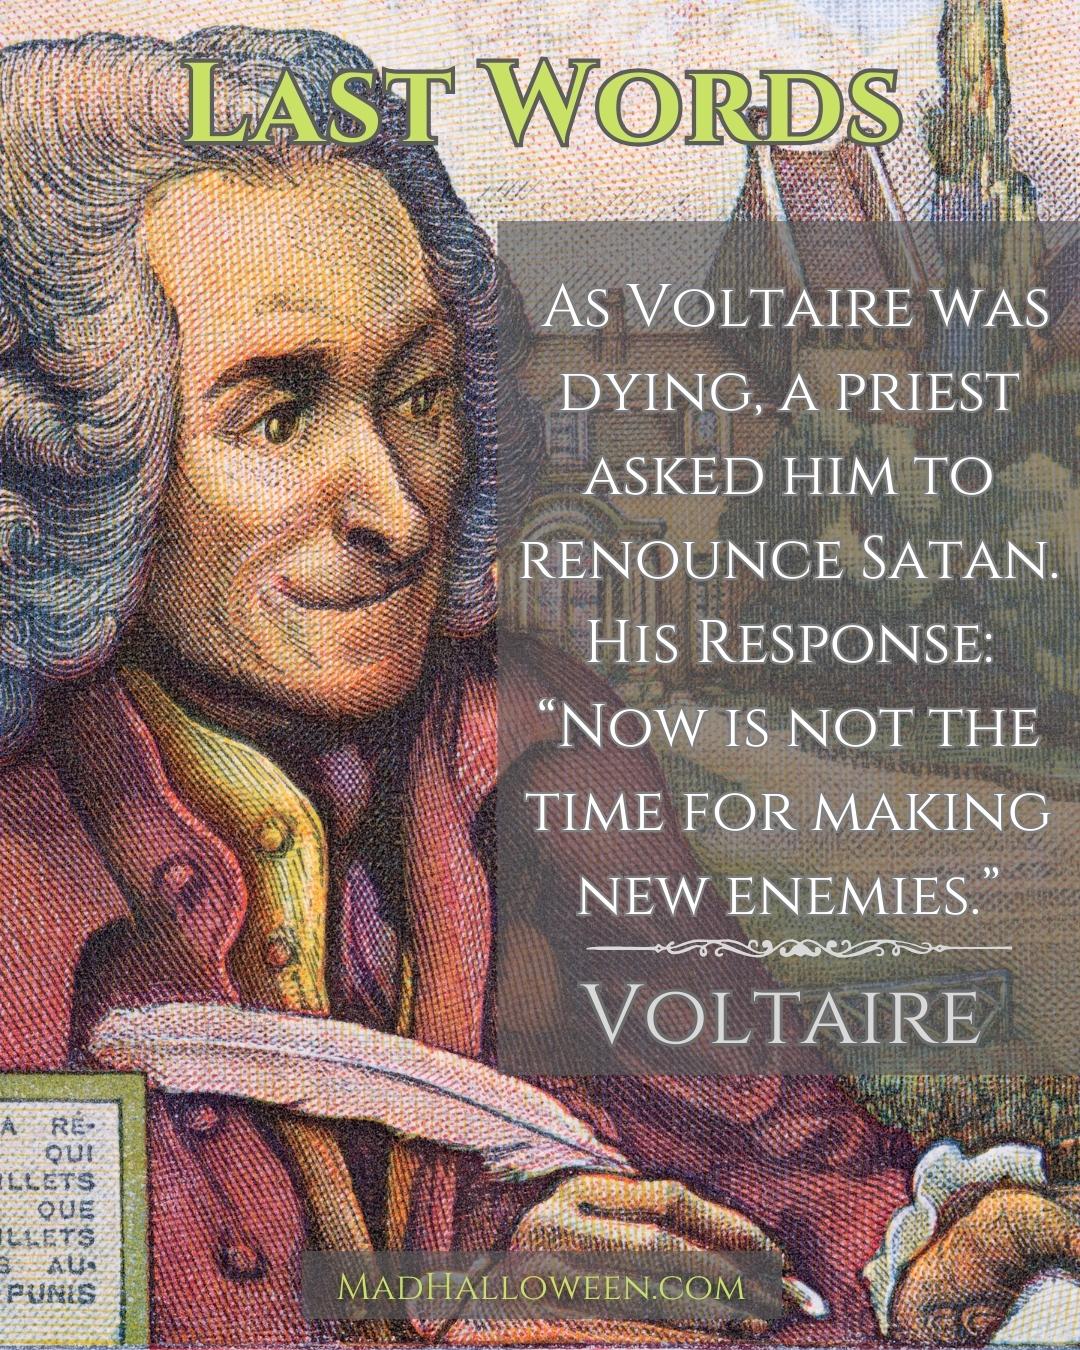 Famous Last Words Quotes of the Departed - Voltaire - Mad Halloween